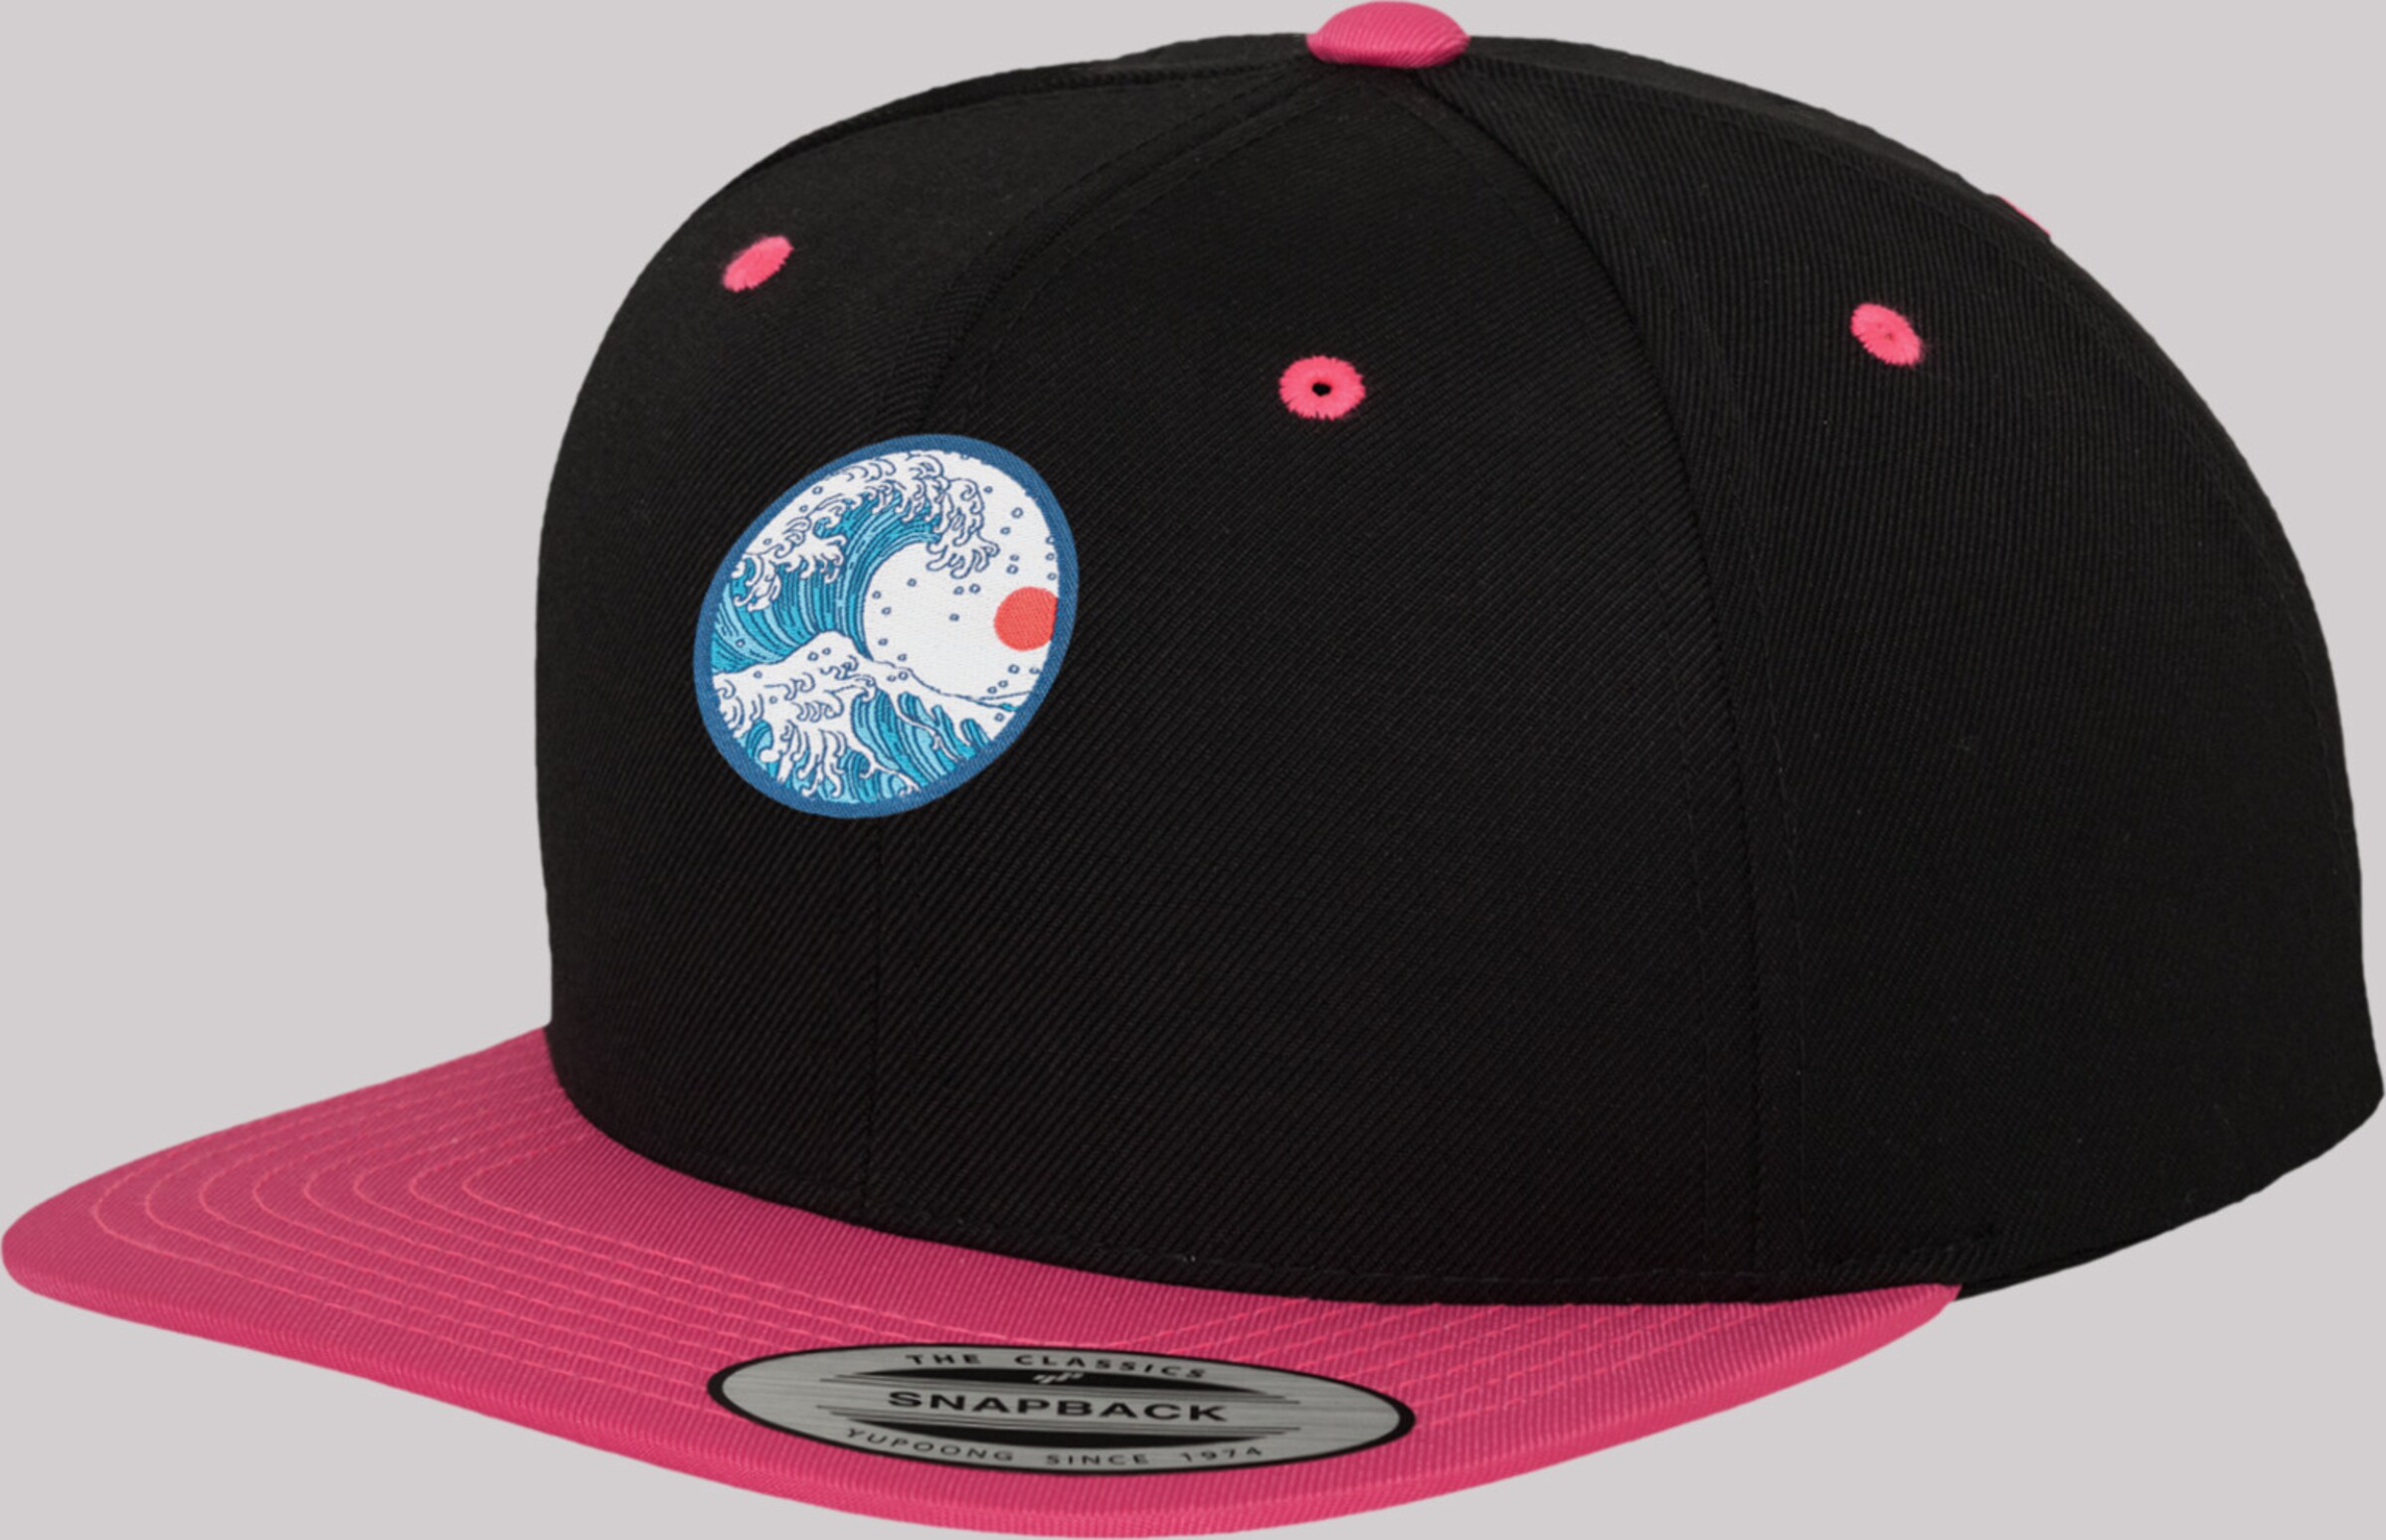 F4NT4STIC Cap 'Kanagawa' in Neon Pink, Black | ABOUT YOU